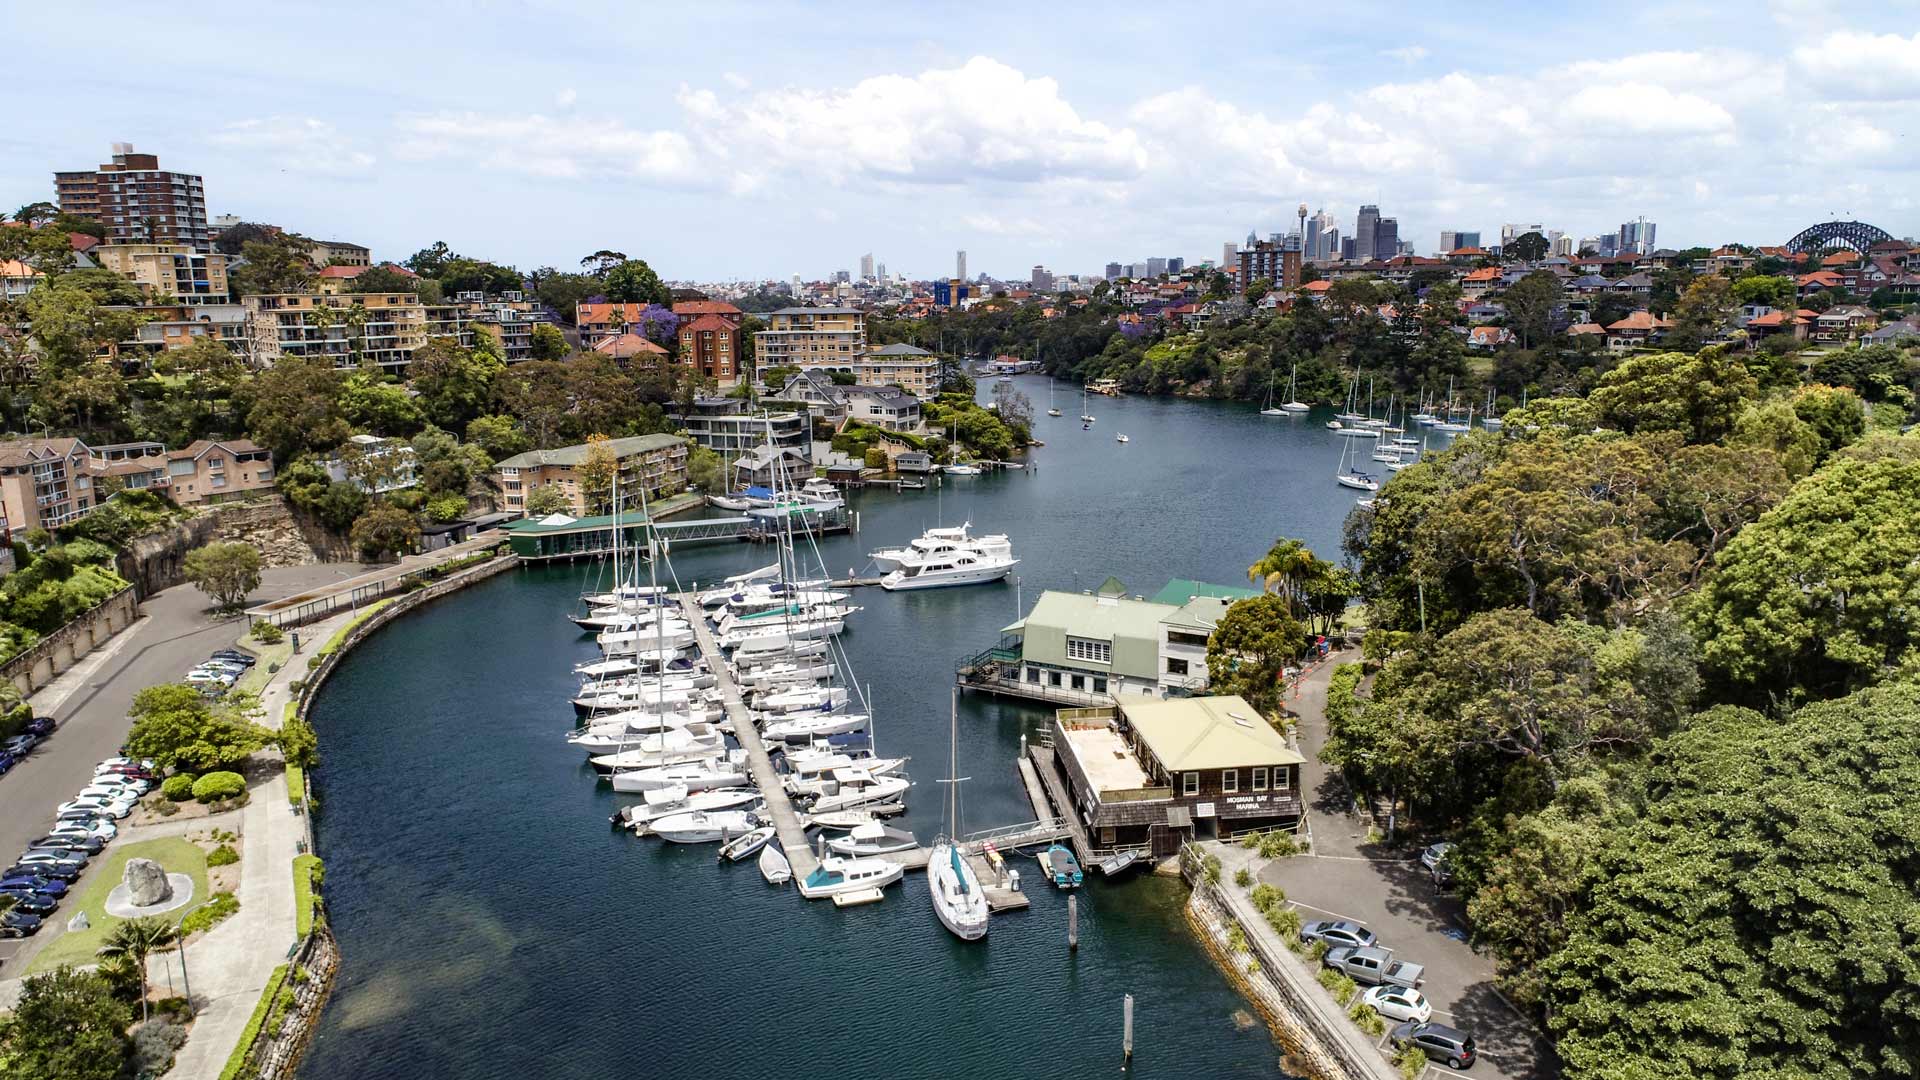 The Lower North Shore's Mosman Rowers Club Has Reopened After a Fire Forced It to Close Last Week